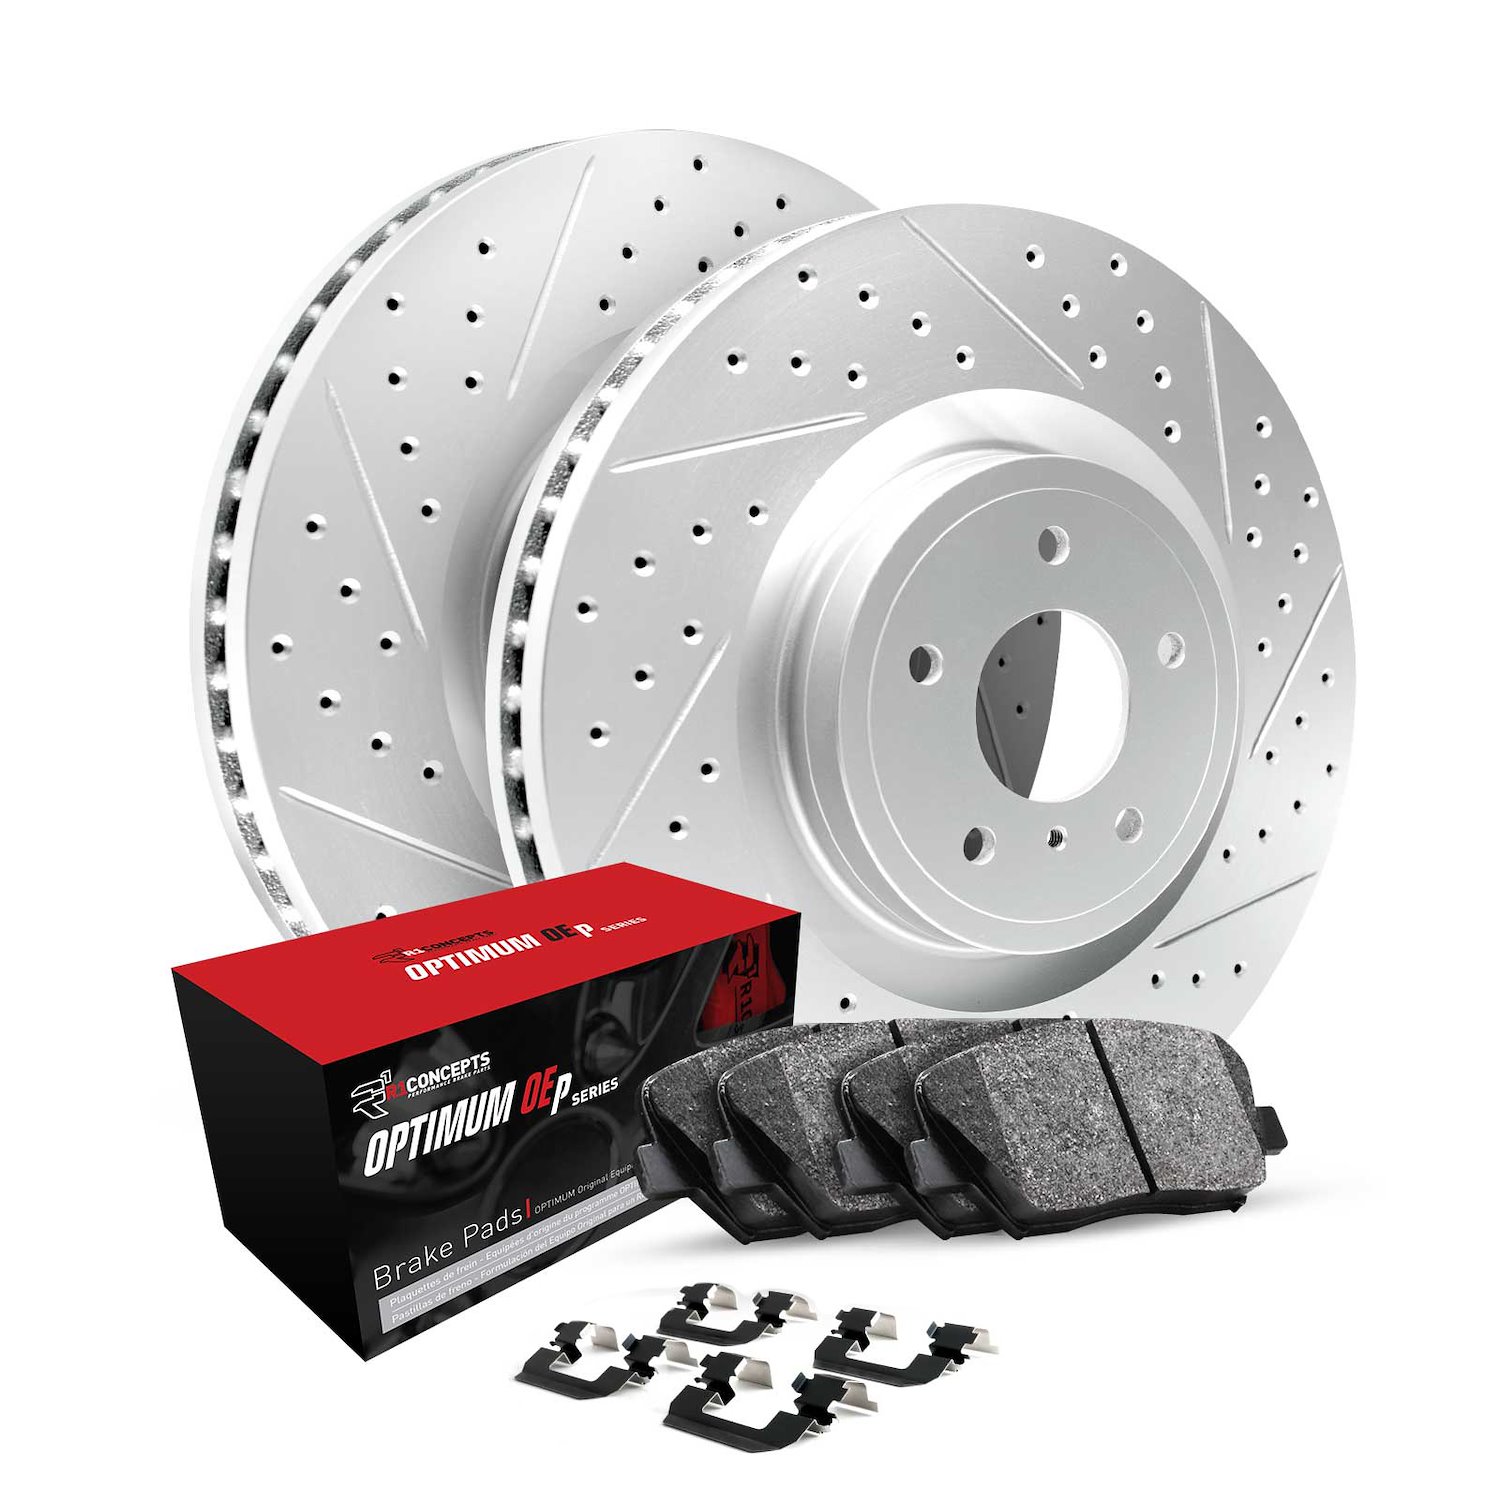 GEO-Carbon Drilled & Slotted Brake Rotor Set w/Optimum OE Pads & Hardware, 2000-2012 Fits Multiple Makes/Models